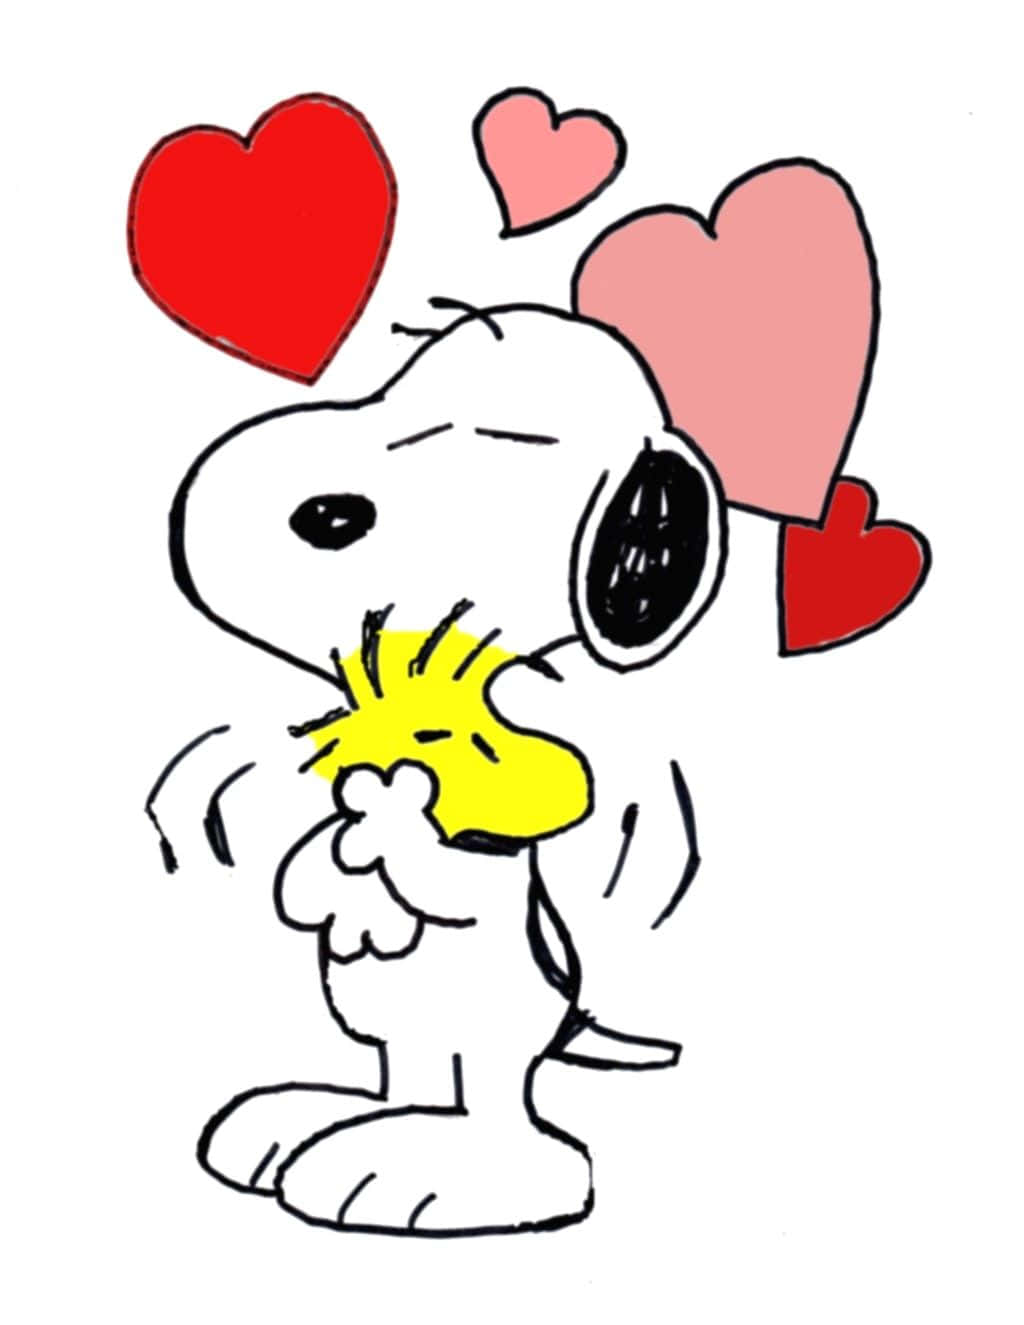 Snoopy Valentine Hugging Woodstock And Hearts